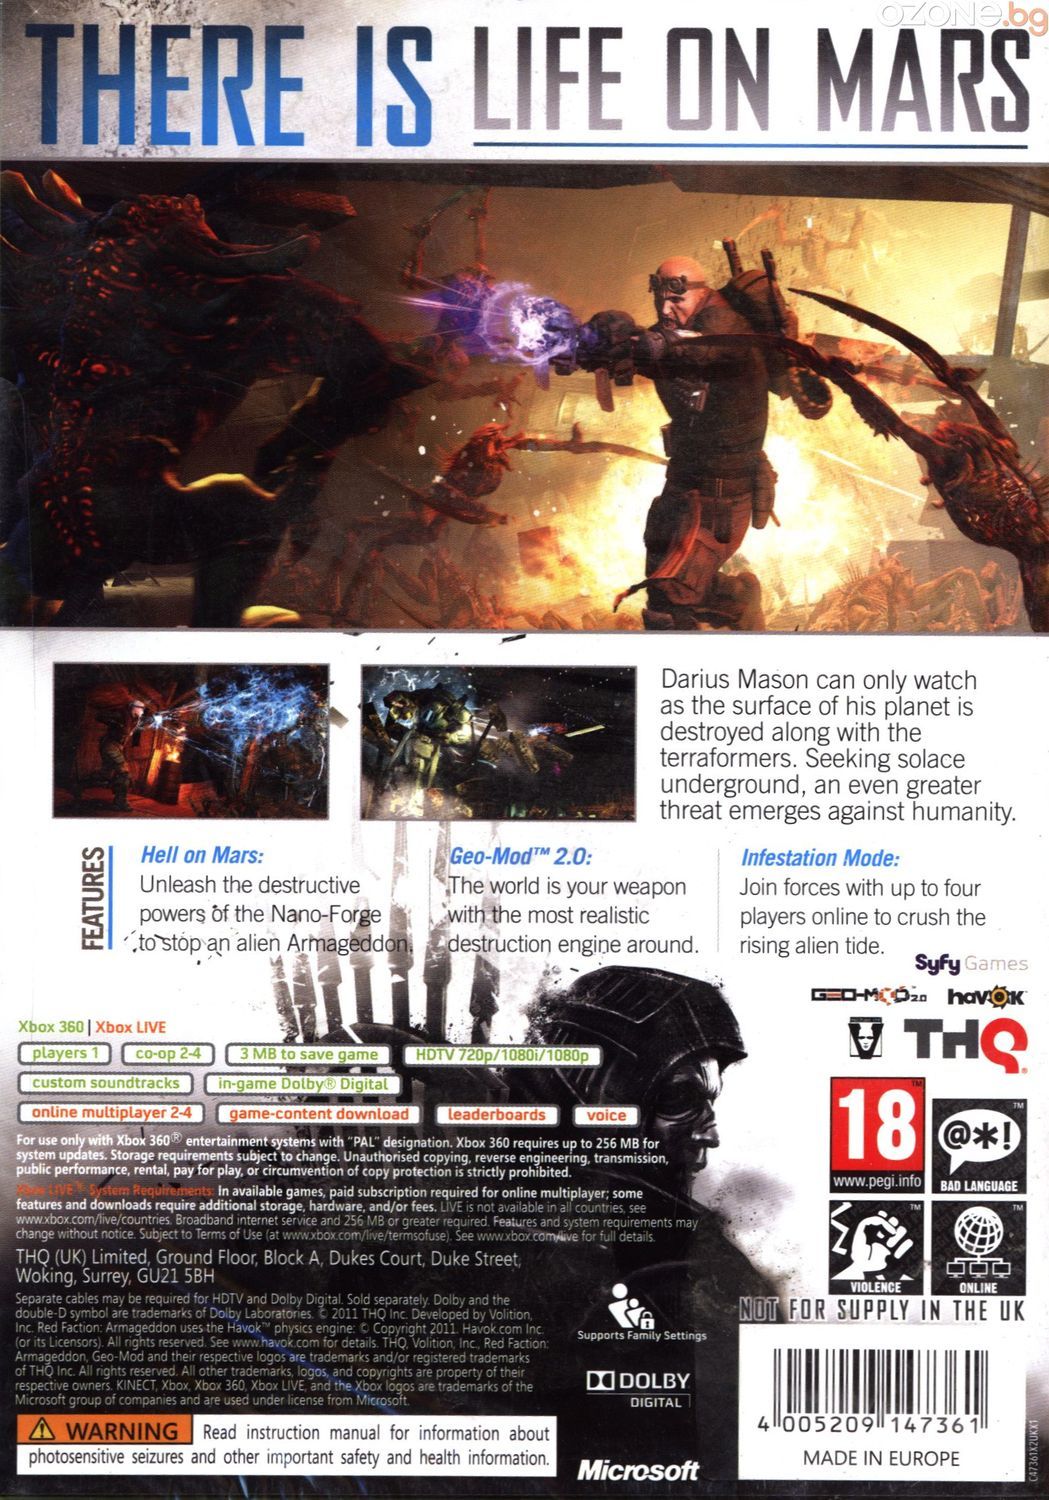 red faction armageddon xbox 360 download